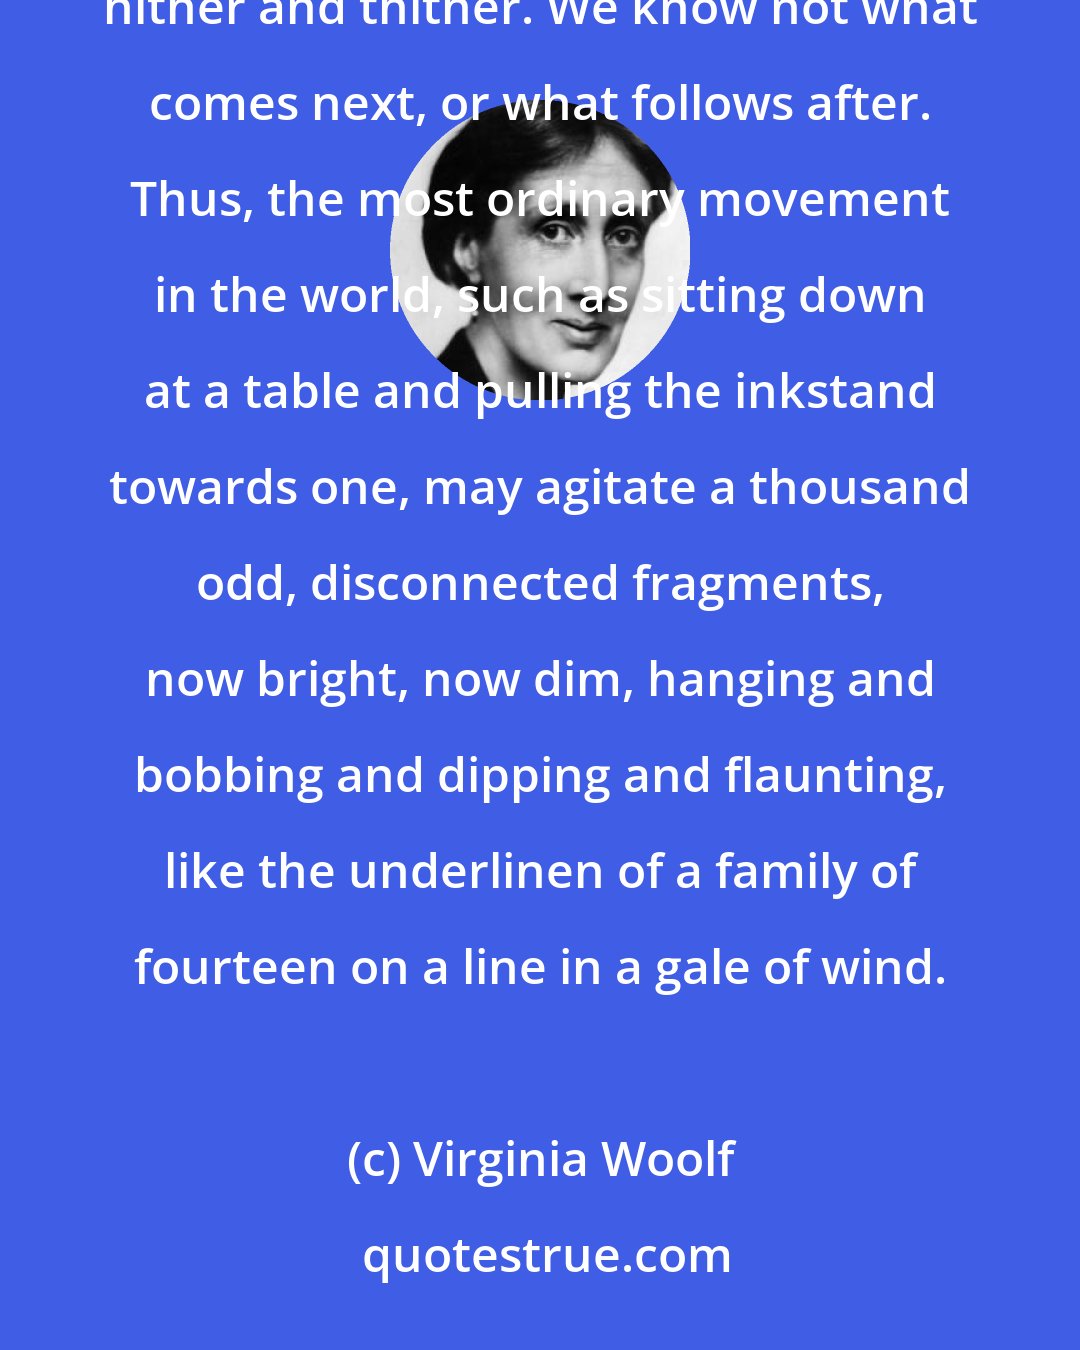 Virginia Woolf: Memory is the seamstress, and a capricious one at that. Memory runs her needle in and out, up and down, hither and thither. We know not what comes next, or what follows after. Thus, the most ordinary movement in the world, such as sitting down at a table and pulling the inkstand towards one, may agitate a thousand odd, disconnected fragments, now bright, now dim, hanging and bobbing and dipping and flaunting, like the underlinen of a family of fourteen on a line in a gale of wind.